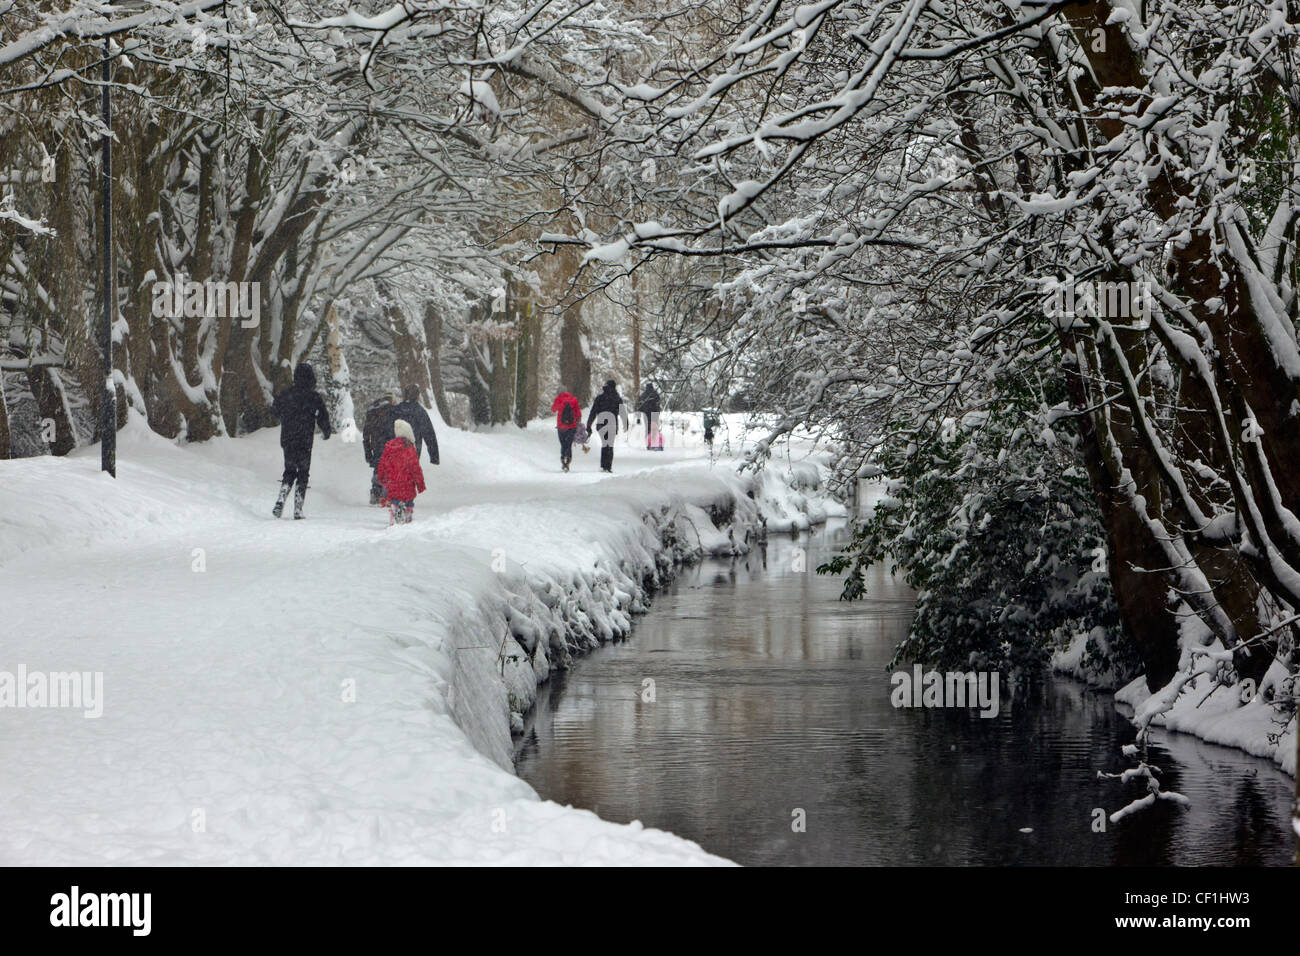 People walking through thick snow along Bow Wow, a lane running alongside the River Churn in winter. Stock Photo